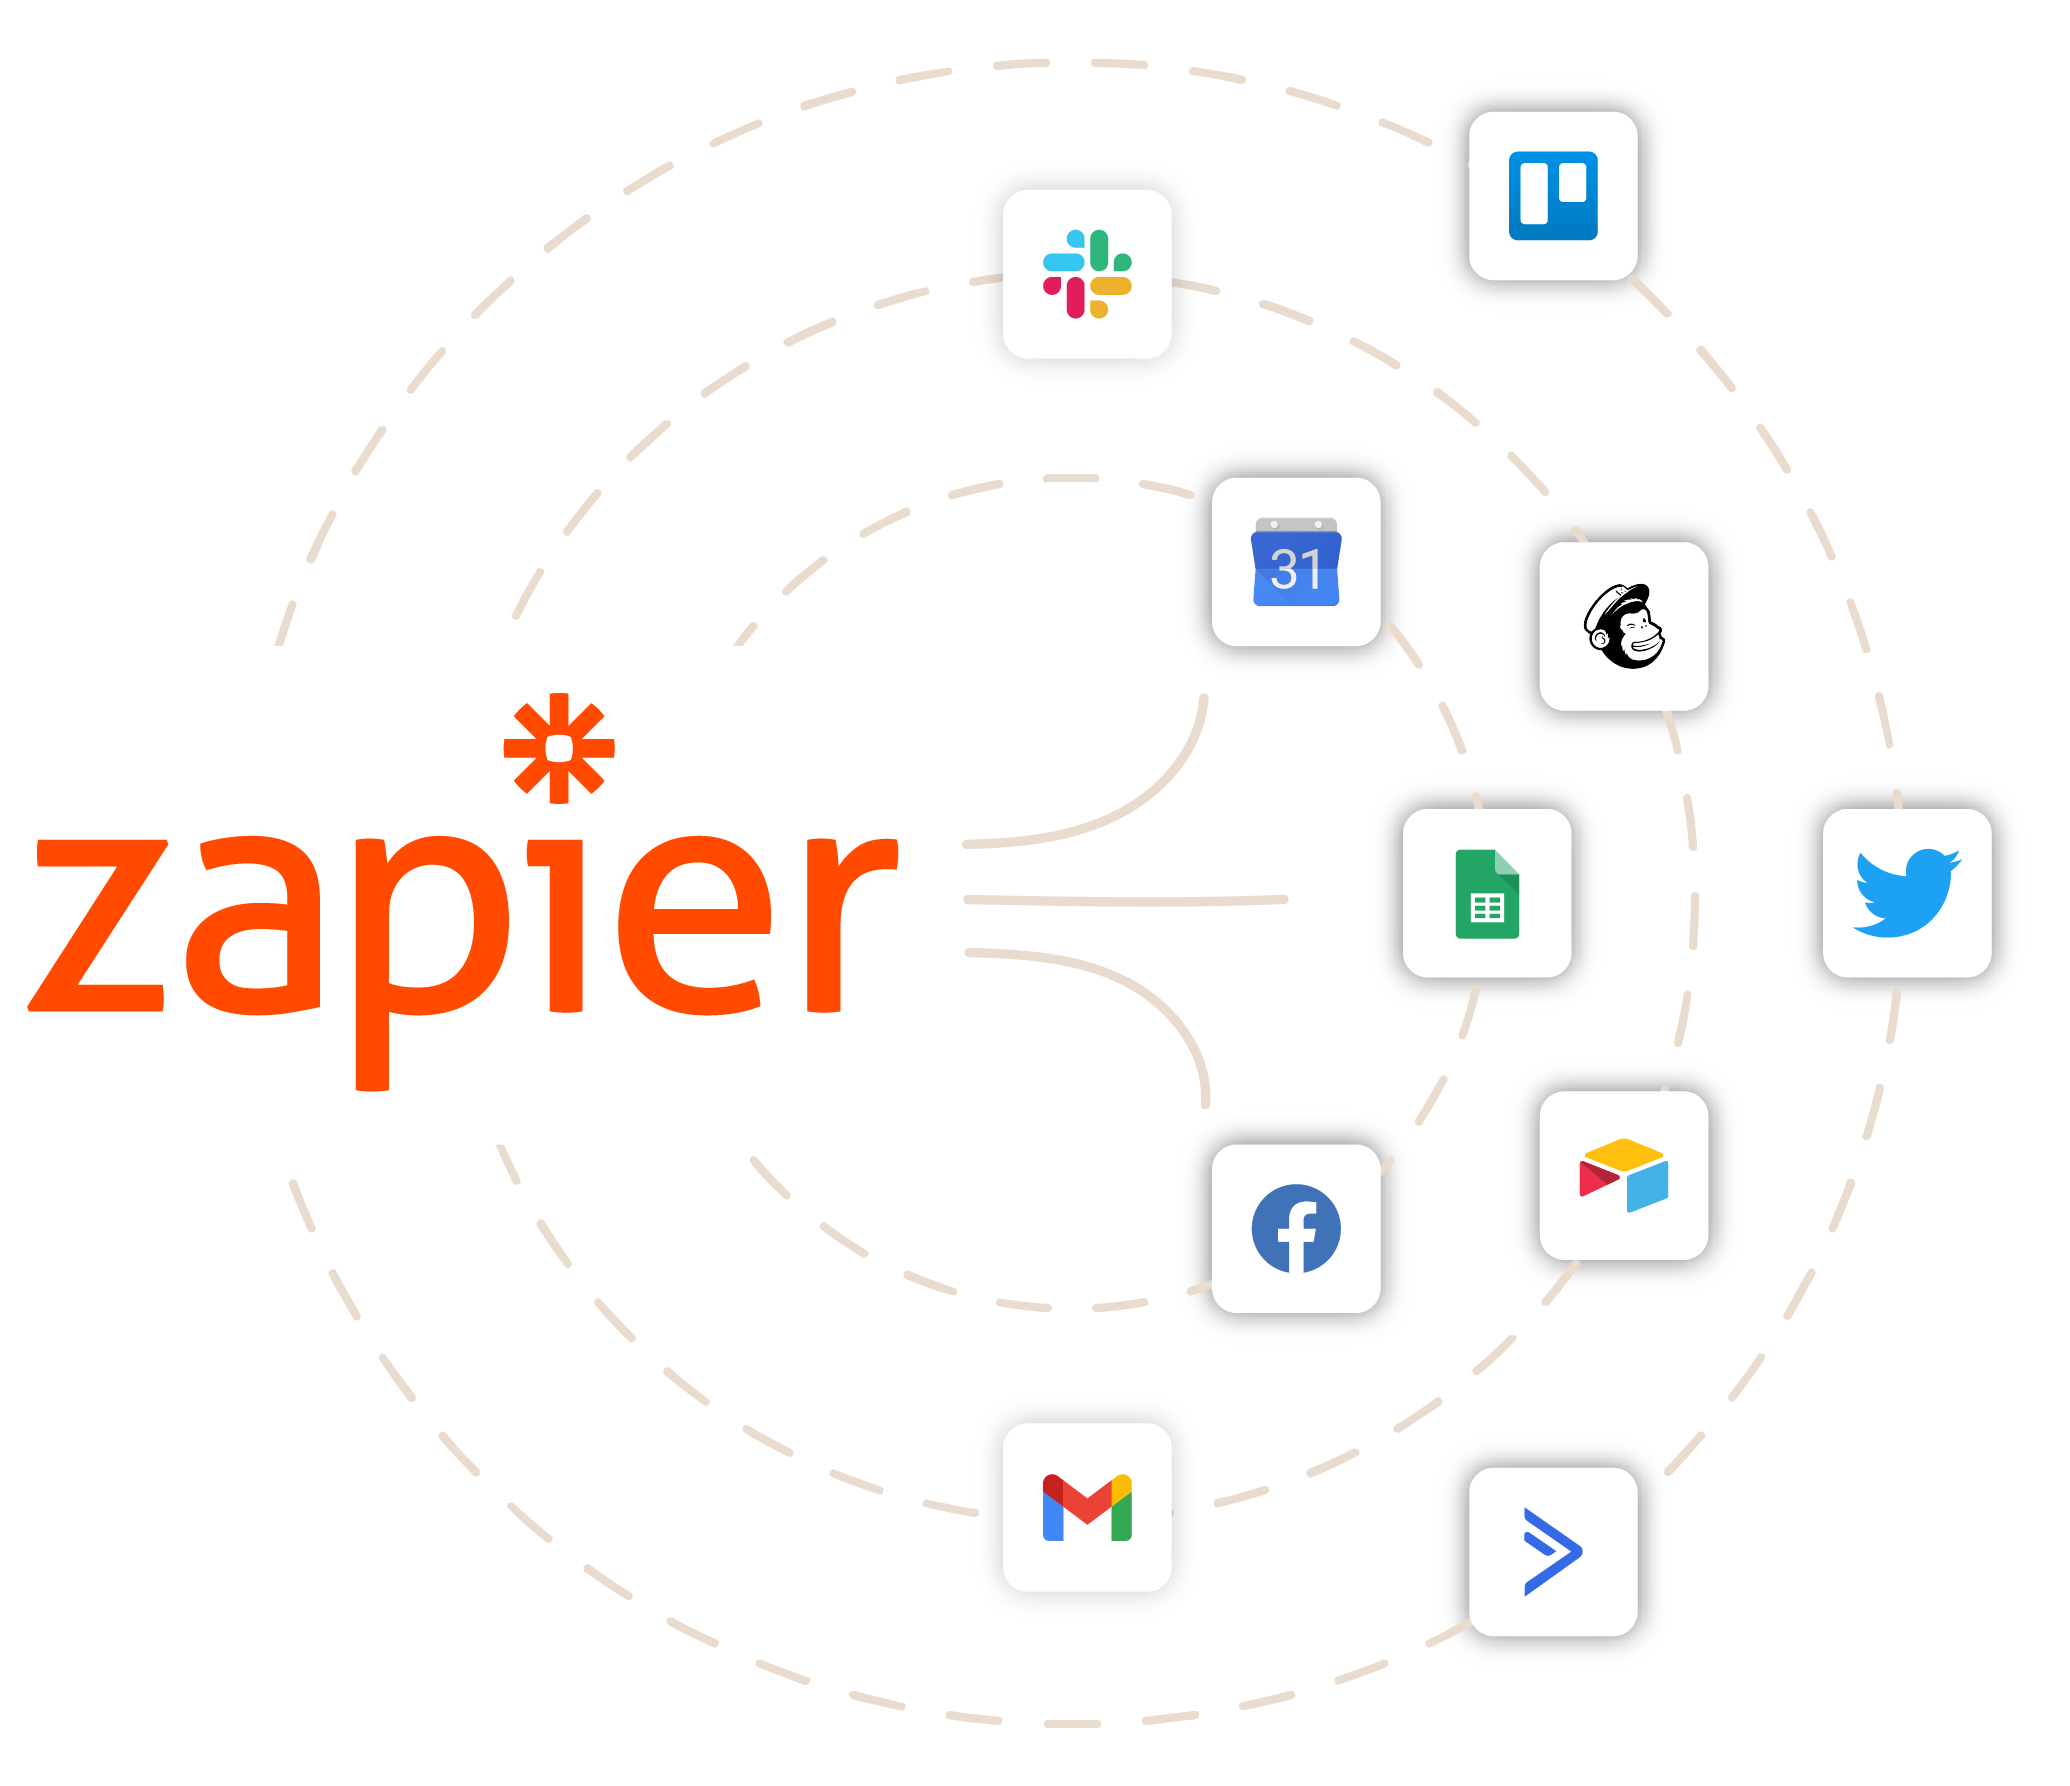 Zapier logo displayed on the left and integration app logos on the right. The logos are connected by dotted circles. The logos featured are: A community platform screenshot with integration icons displayed on the home feed. The icons are connected by a line. Icons shown: Google calendar, Trello, Gmail, Excel, Twitter, Airtable, ActiveCampaign, Slack, Mailchimp, and Facebook.